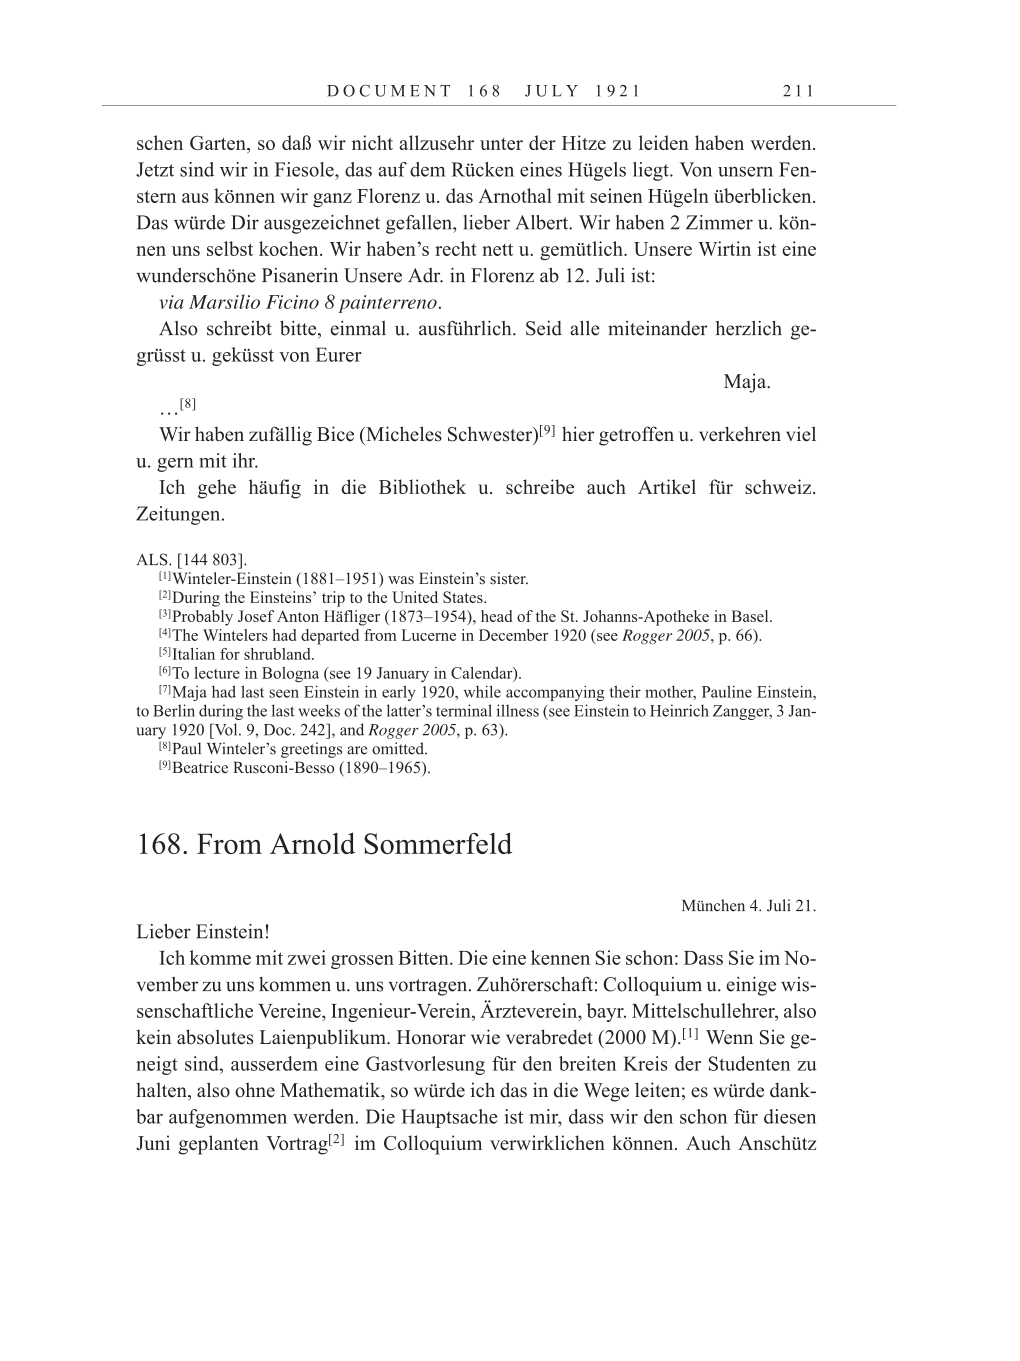 Volume 12: The Berlin Years: Correspondence January-December 1921 page 211